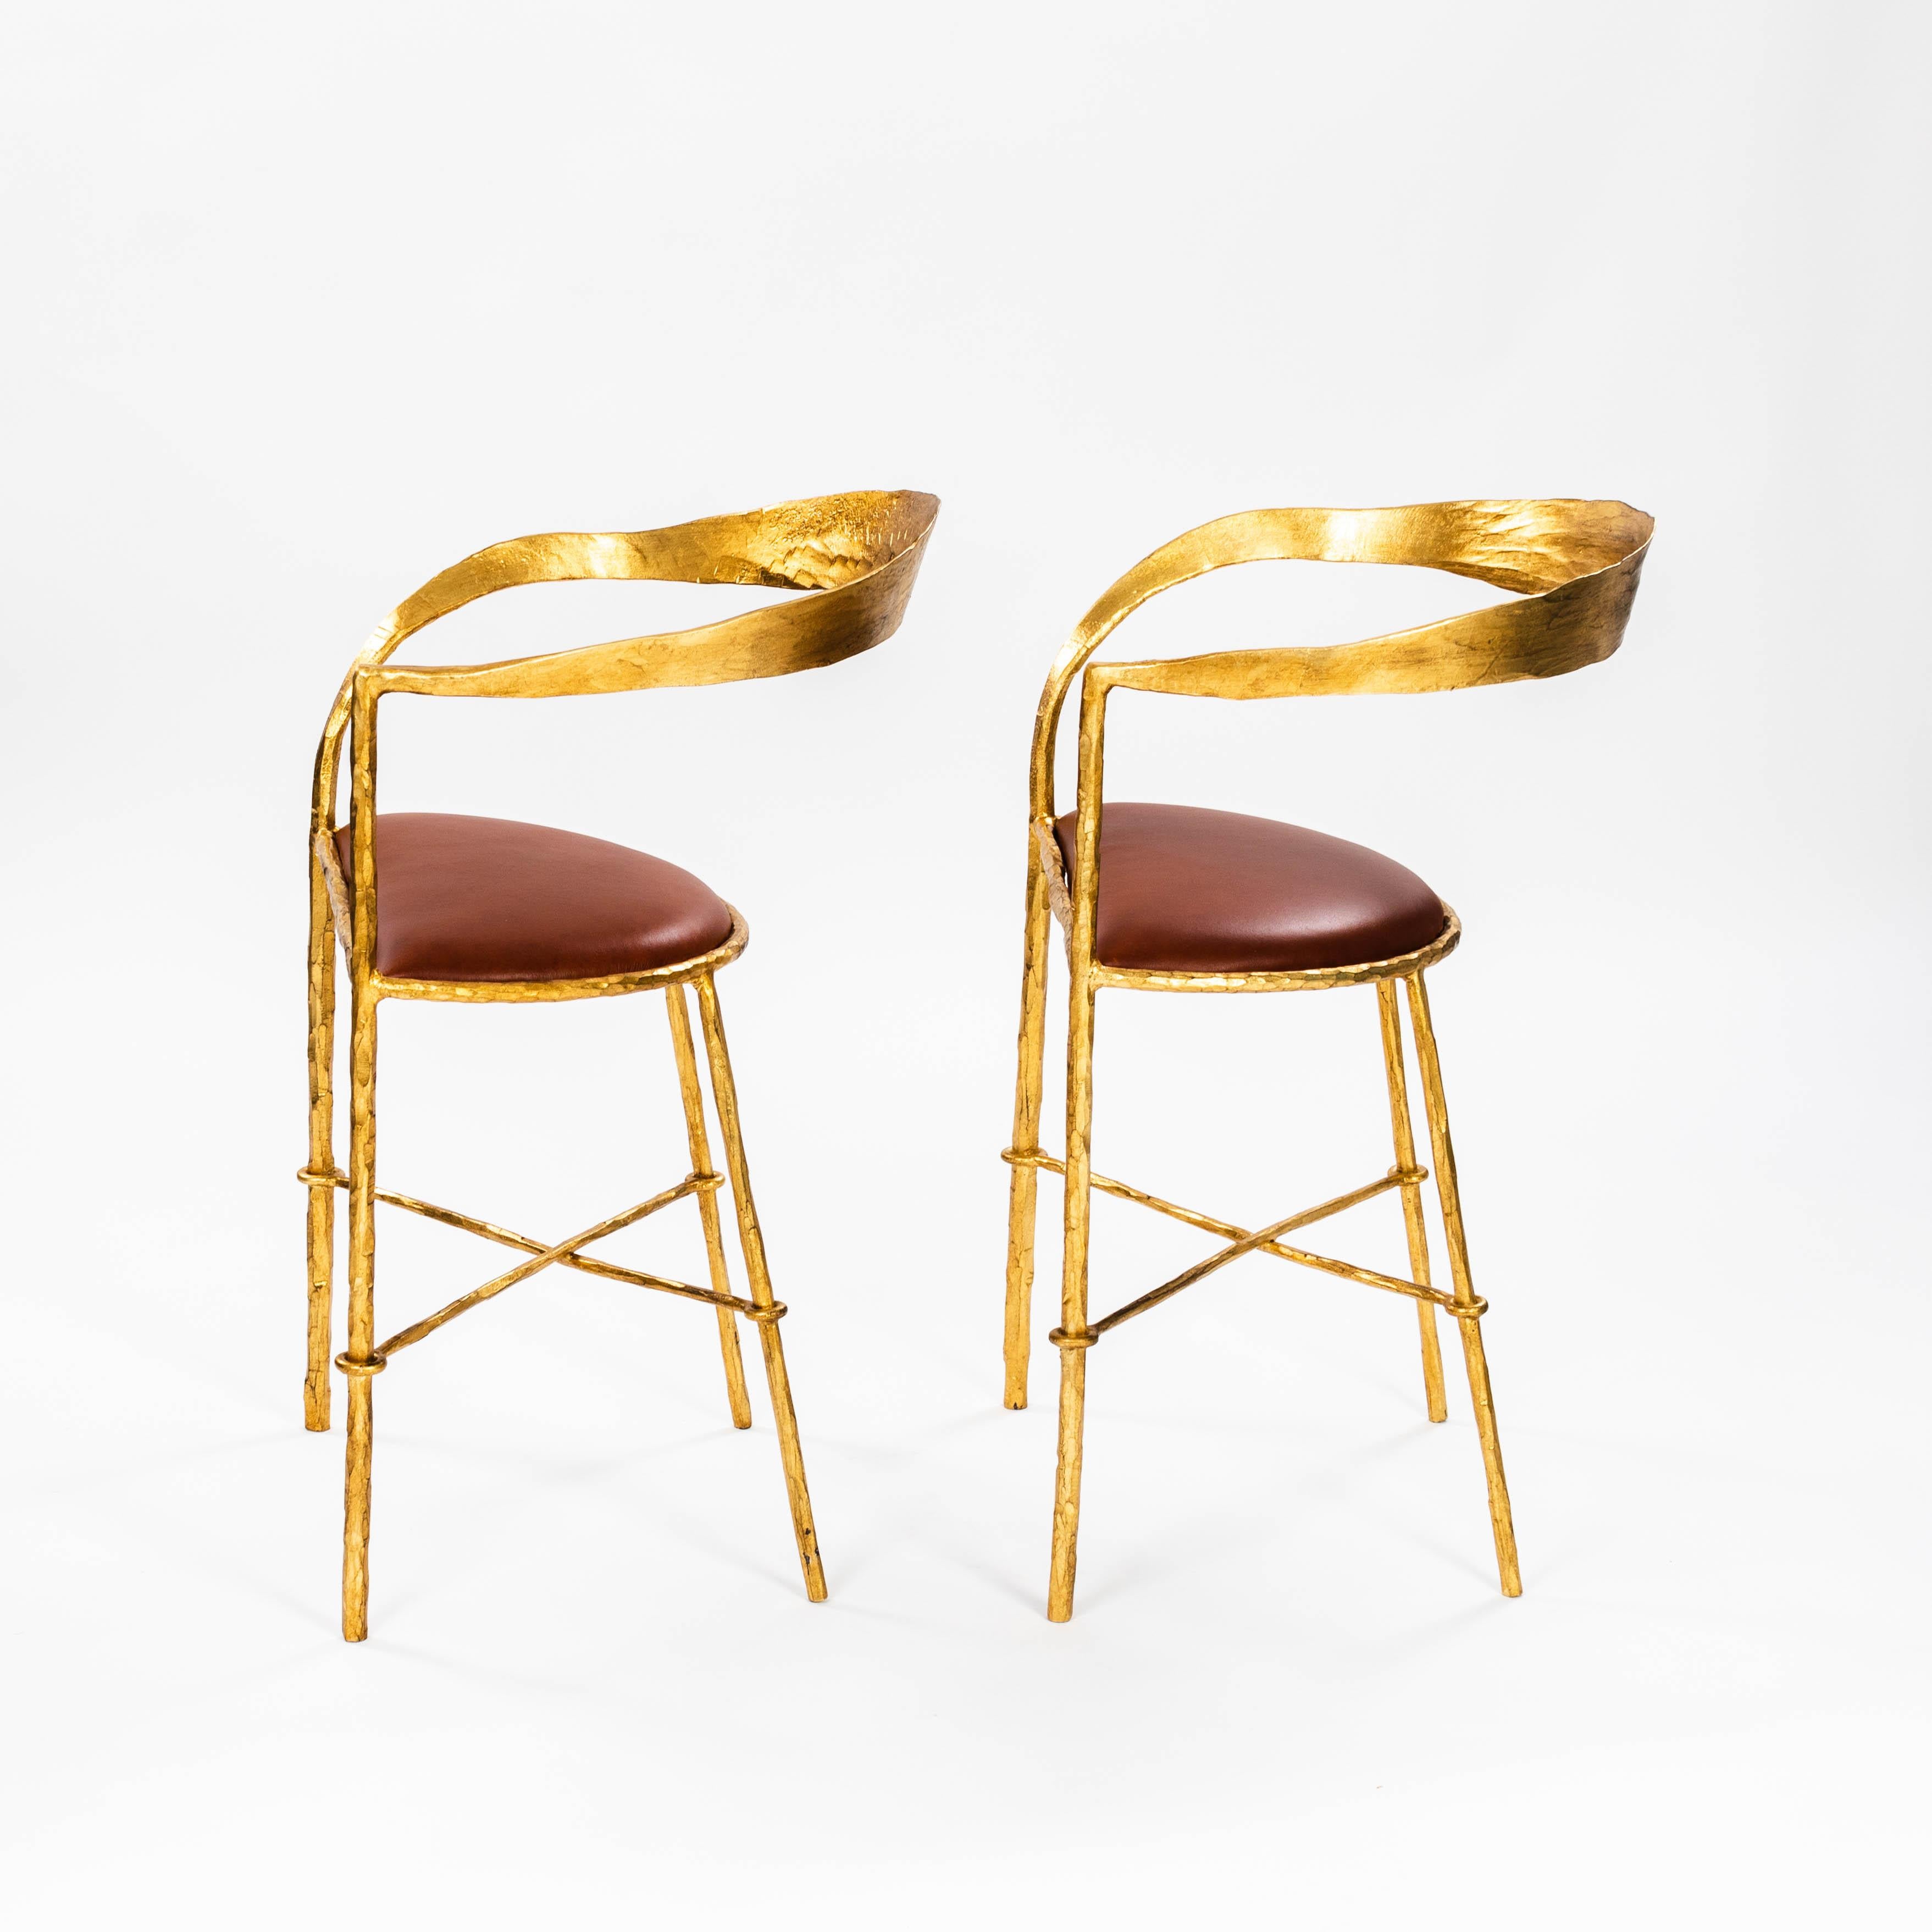 Pair of Hand Forged Gold Plated Mid-Century Armchairs by Banci Florence 1970s For Sale 4